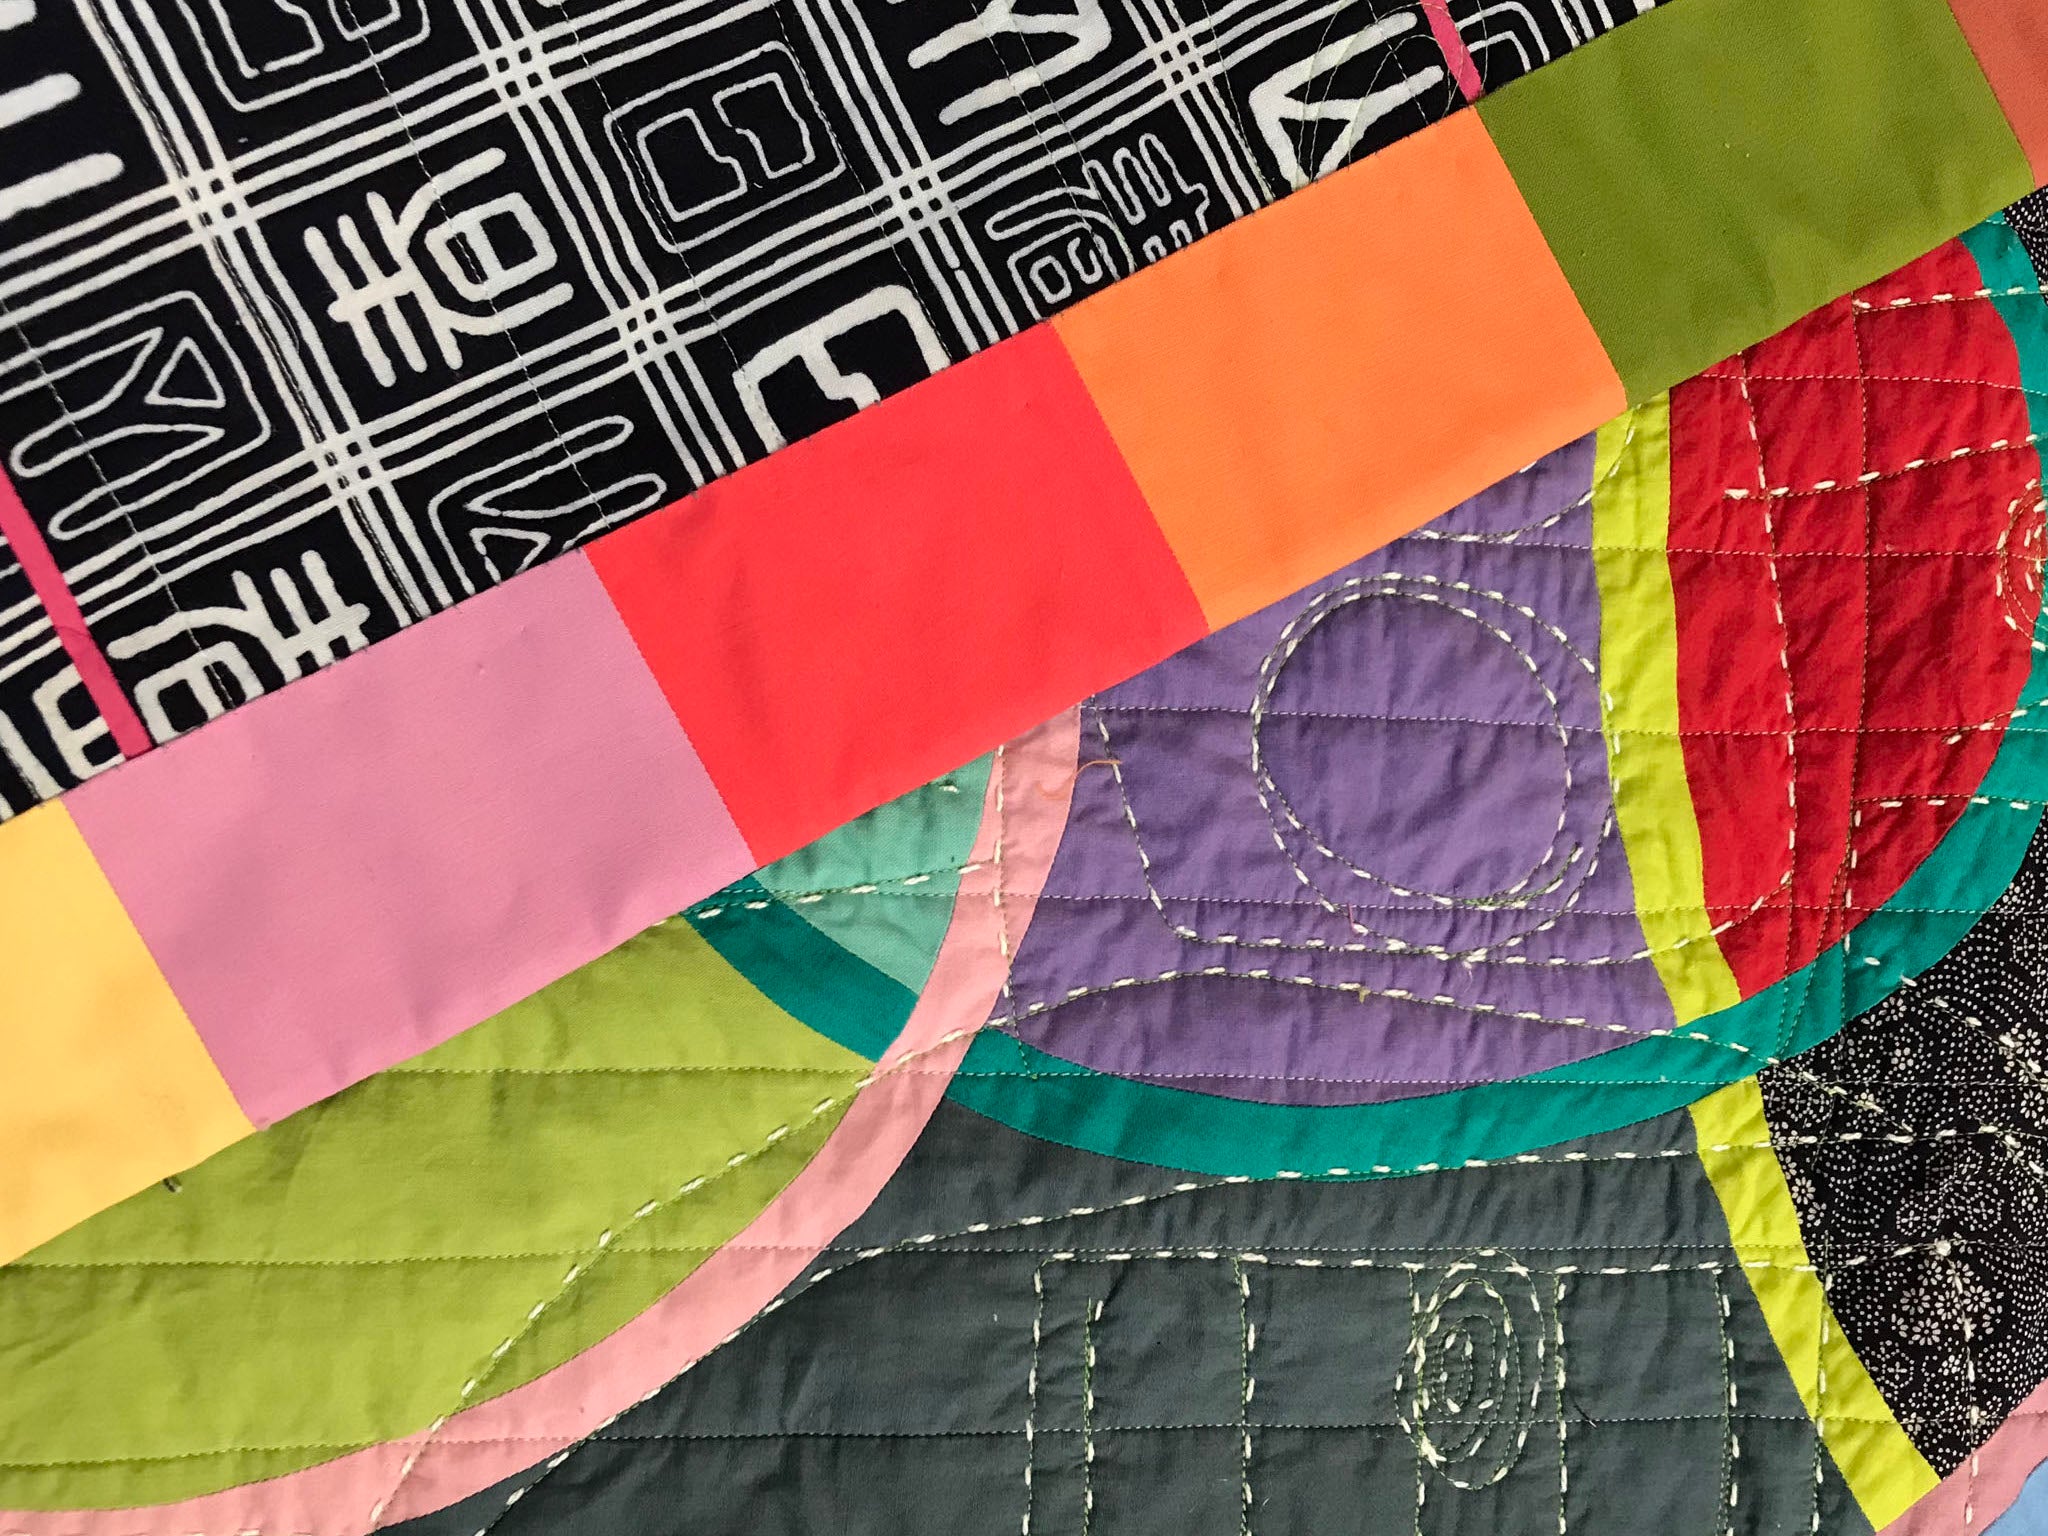 Watermelon From Mars, a quilt by Patricia Belyea